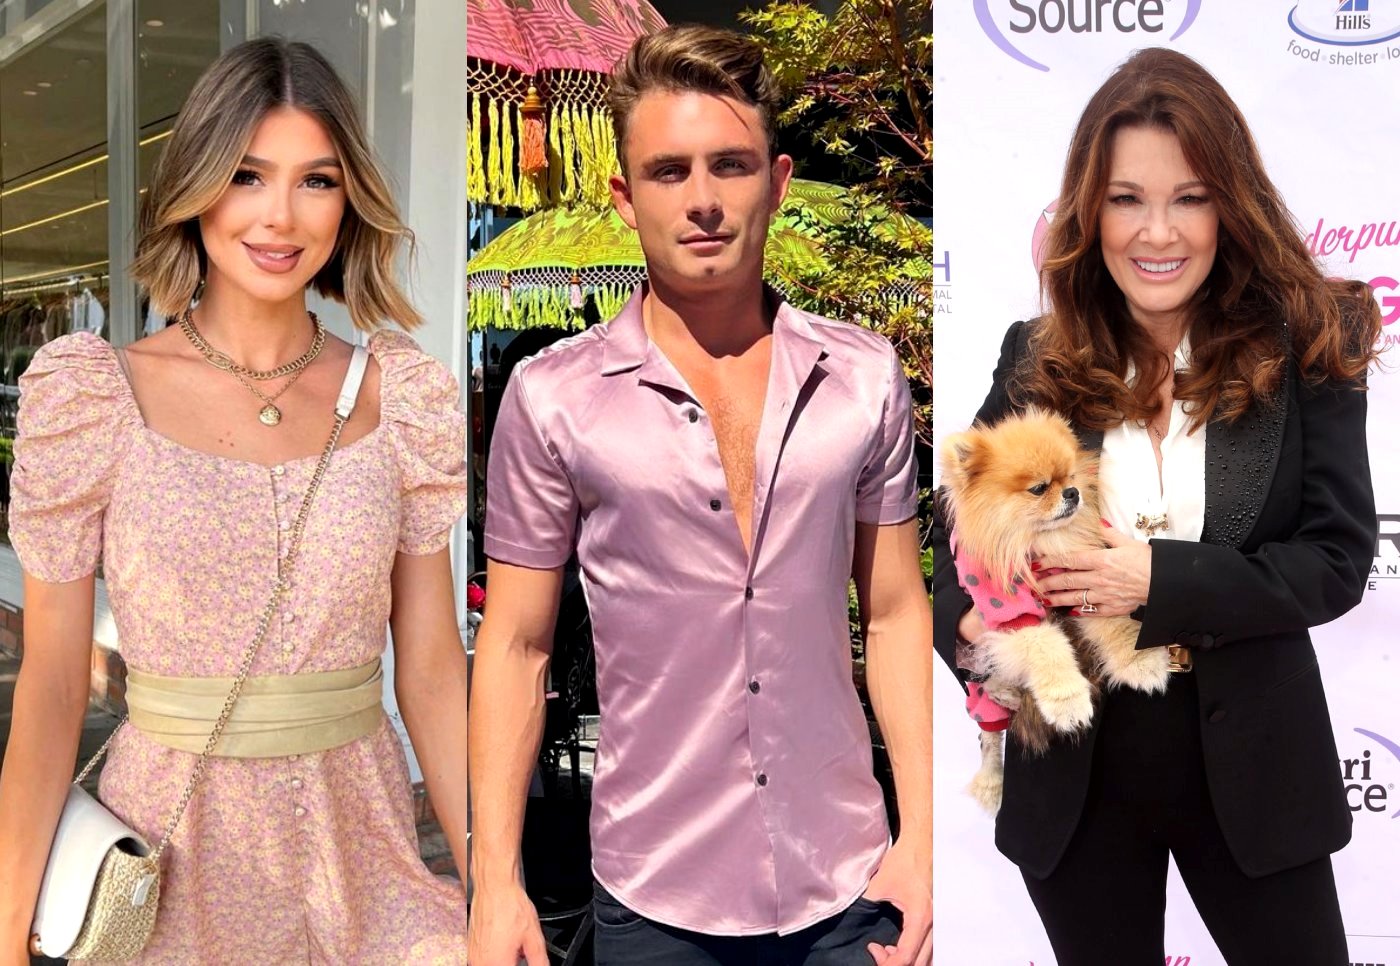 Raquel Leviss Alleges Ex James Kennedy Would "Taunt" & "Antagonize" Dog Graham & Shares How, Calls Out Lisa Vanderpump for Creating Fake "Storyline," and Suspects Lisa Was Plotting On-Camera Reveal Before She Quit Vanderpump Rules